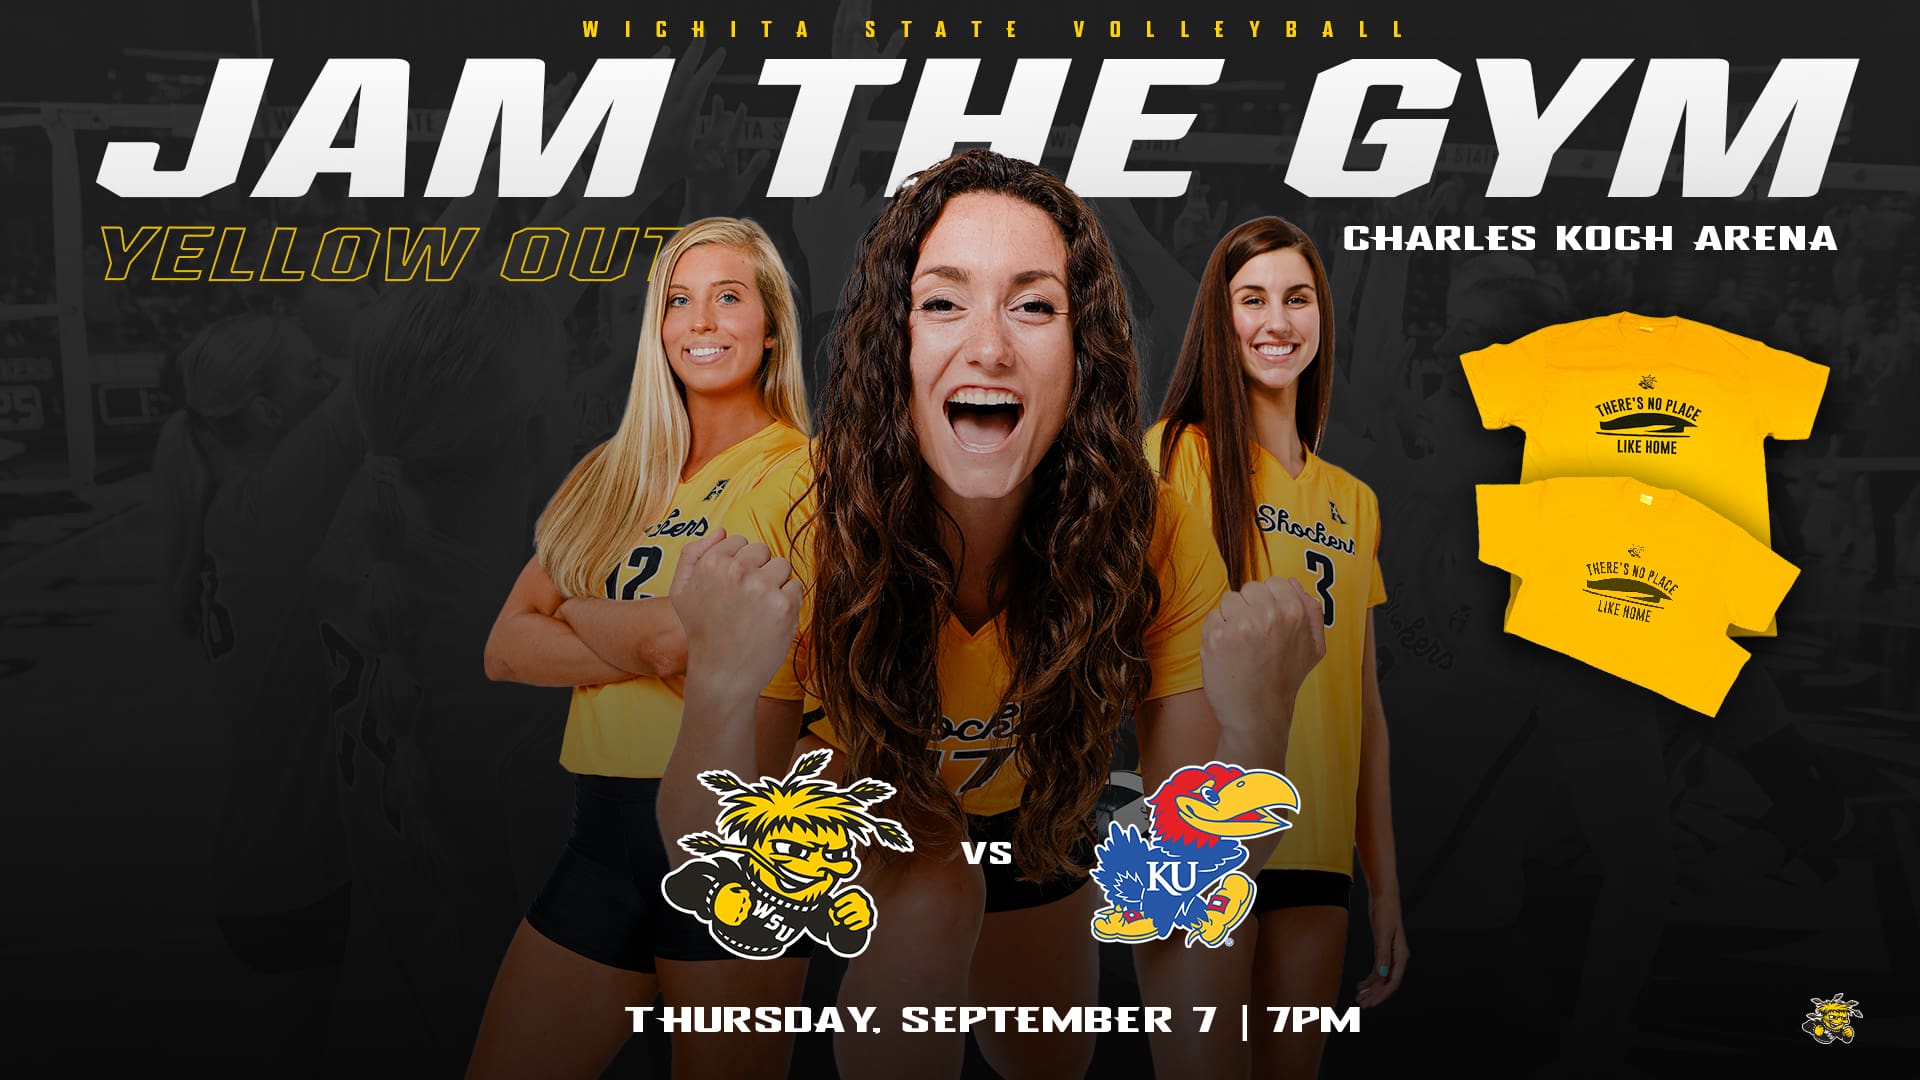 Wichita State Volleyball. Jam the Gym. Yellow Out. Charles Koch Arena. Thursday, September 7th | 7PM.